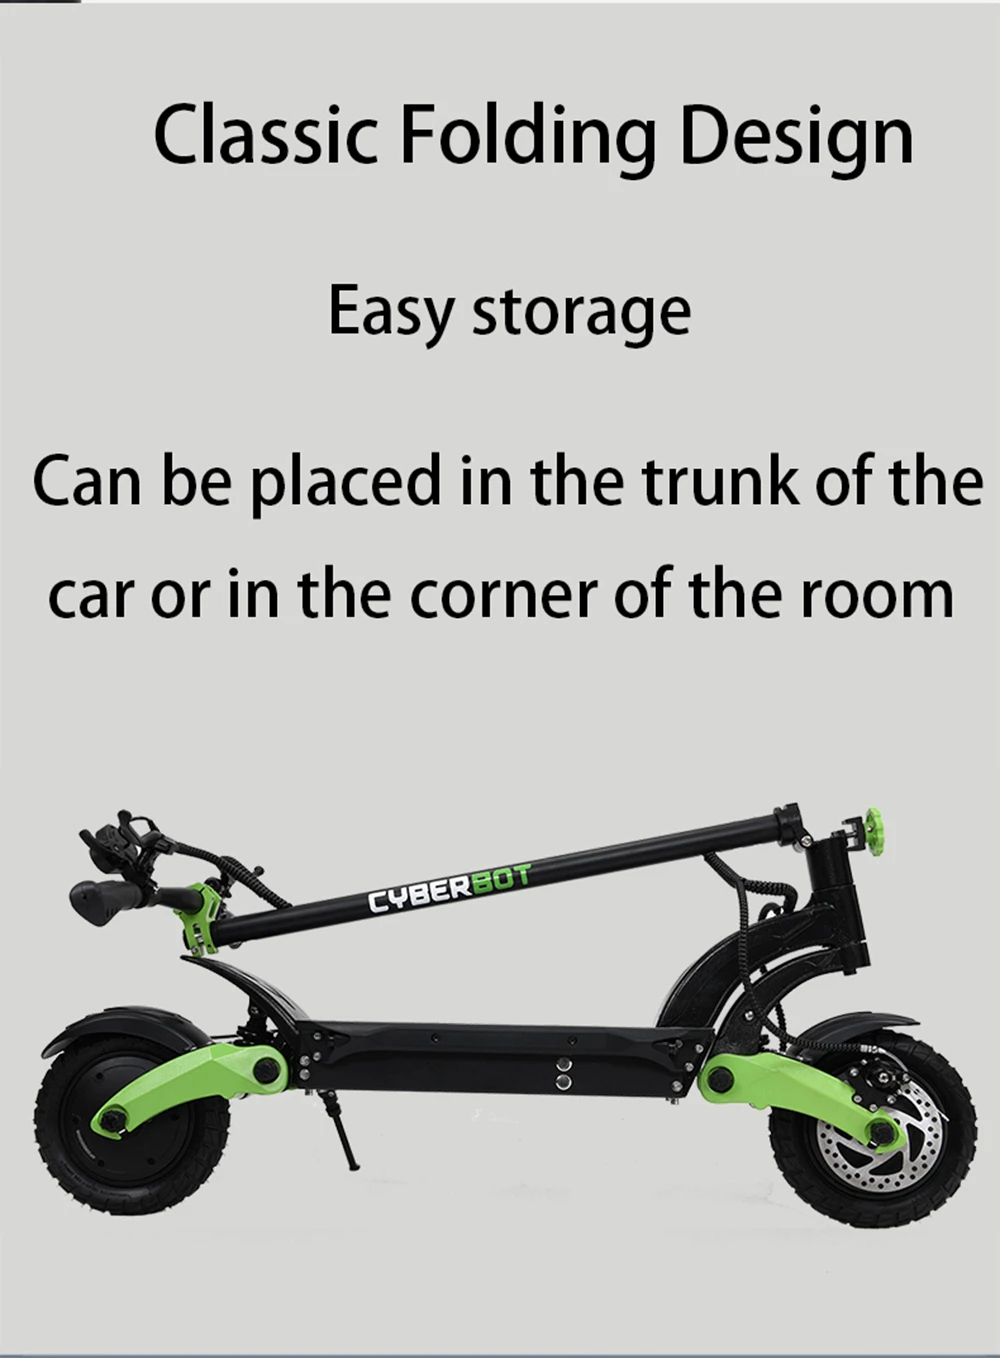 CYBERBOT MINI Electric Scooter Front 500W + Rear 500W Dual Motors 48V 18Ah Battery for 30-40KM Range 53KM Max Speed